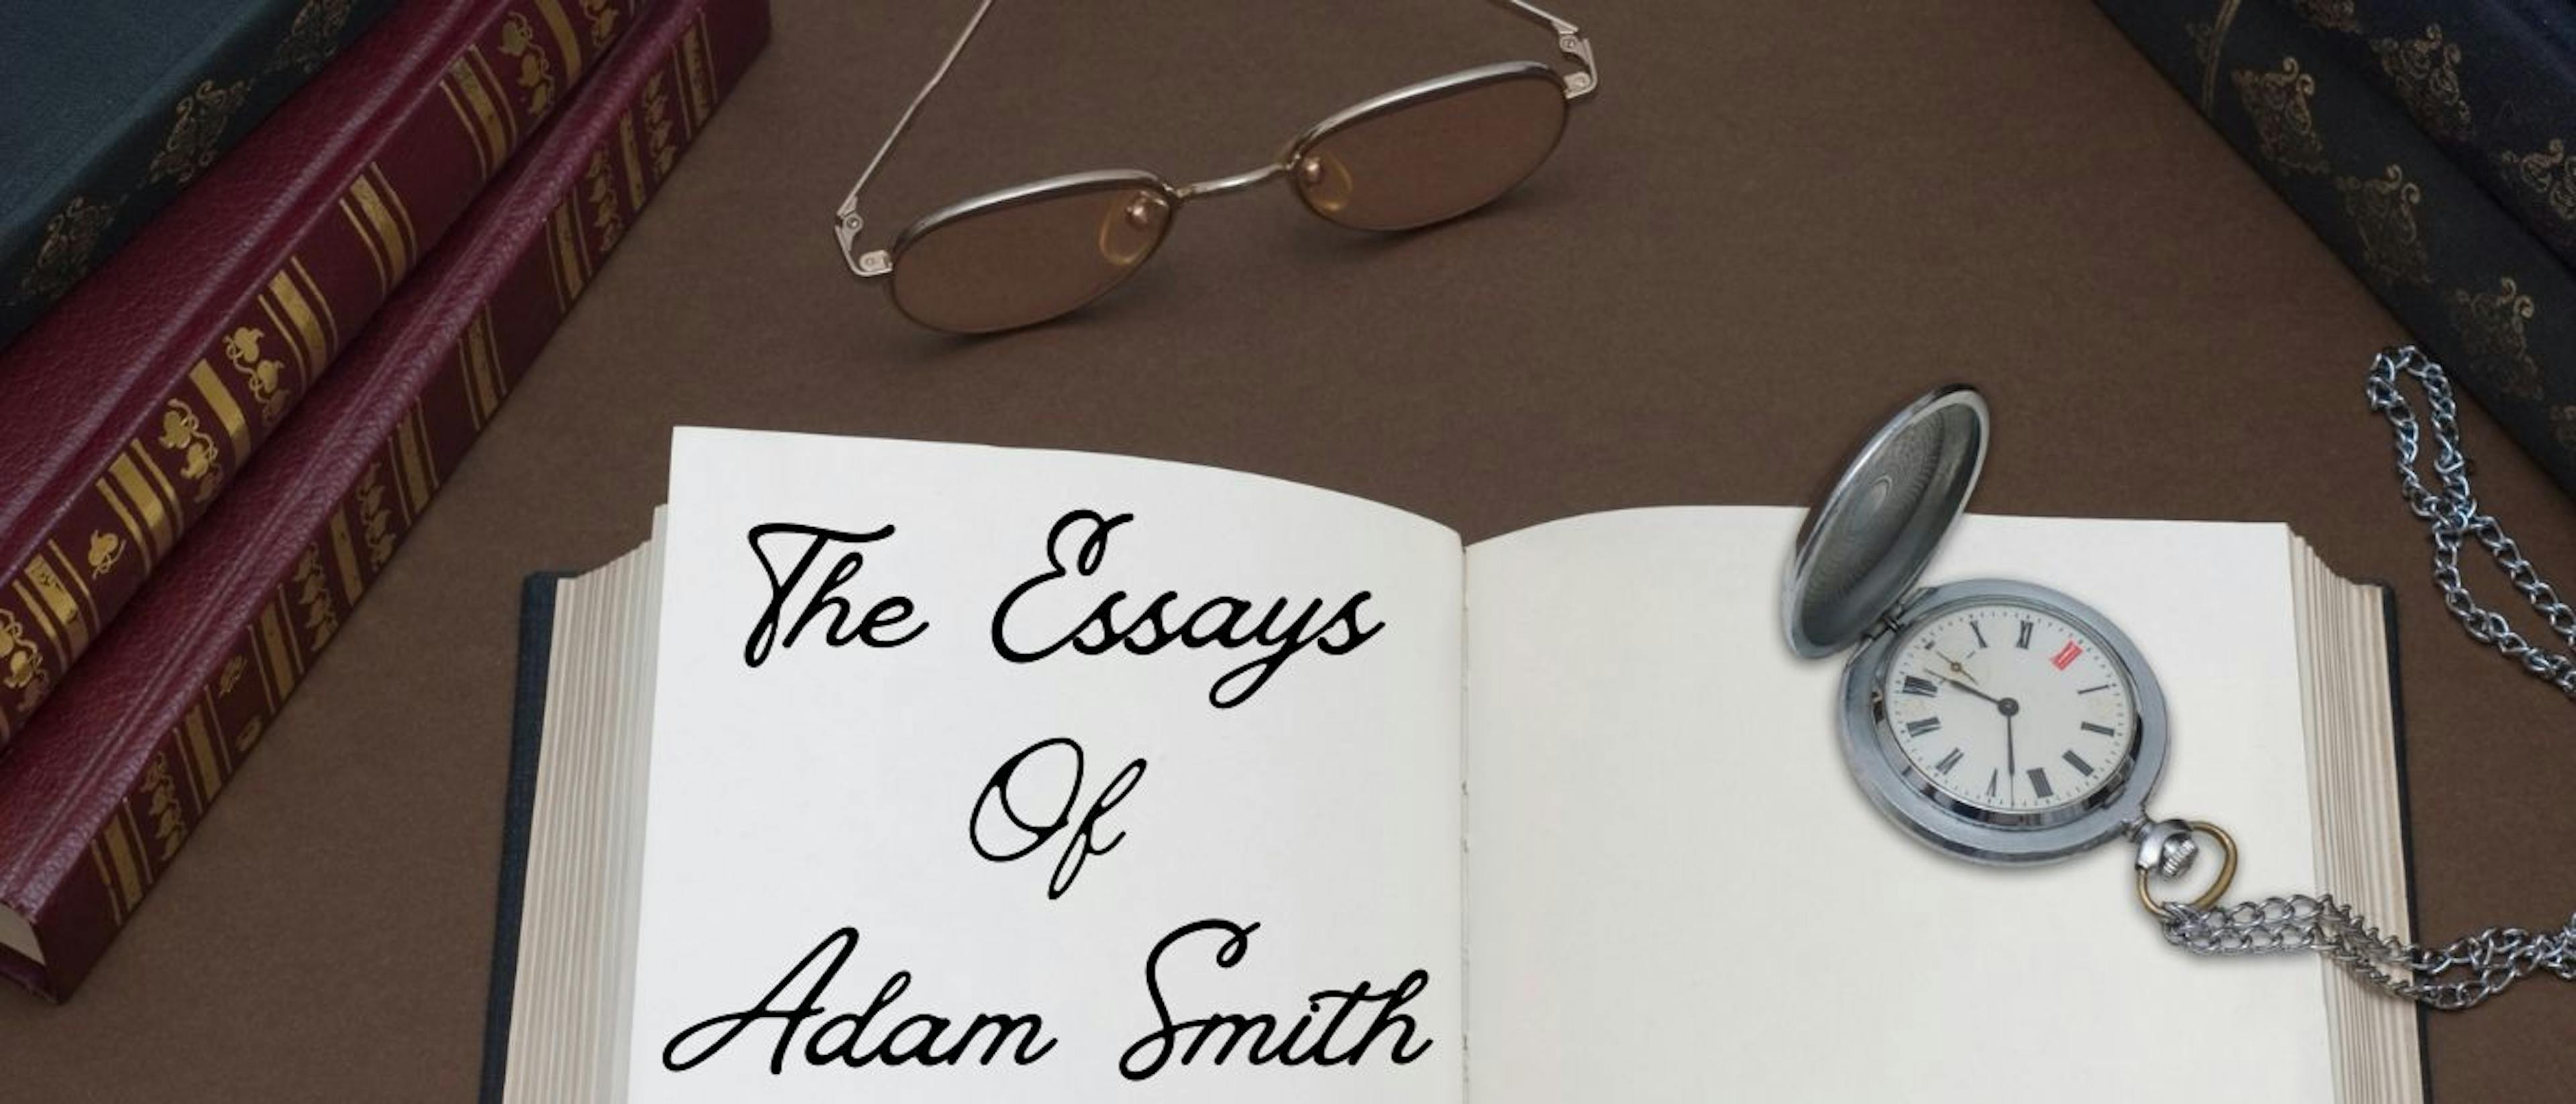 featured image - The Essays of Adam Smith: Part VI, Section II